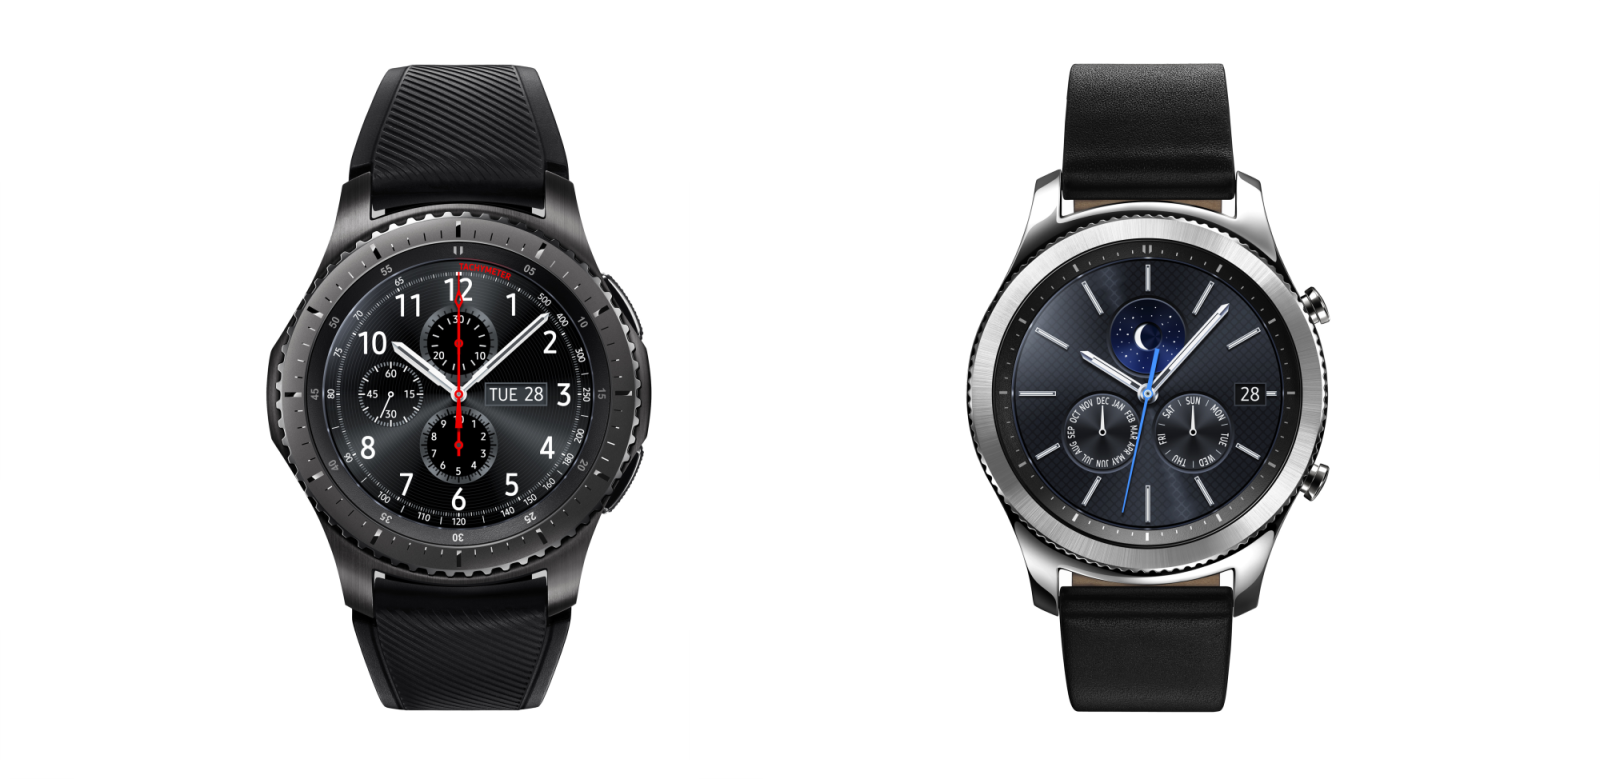 Samsung launches Gear S3 in India, priced at Rs. 28,500 1